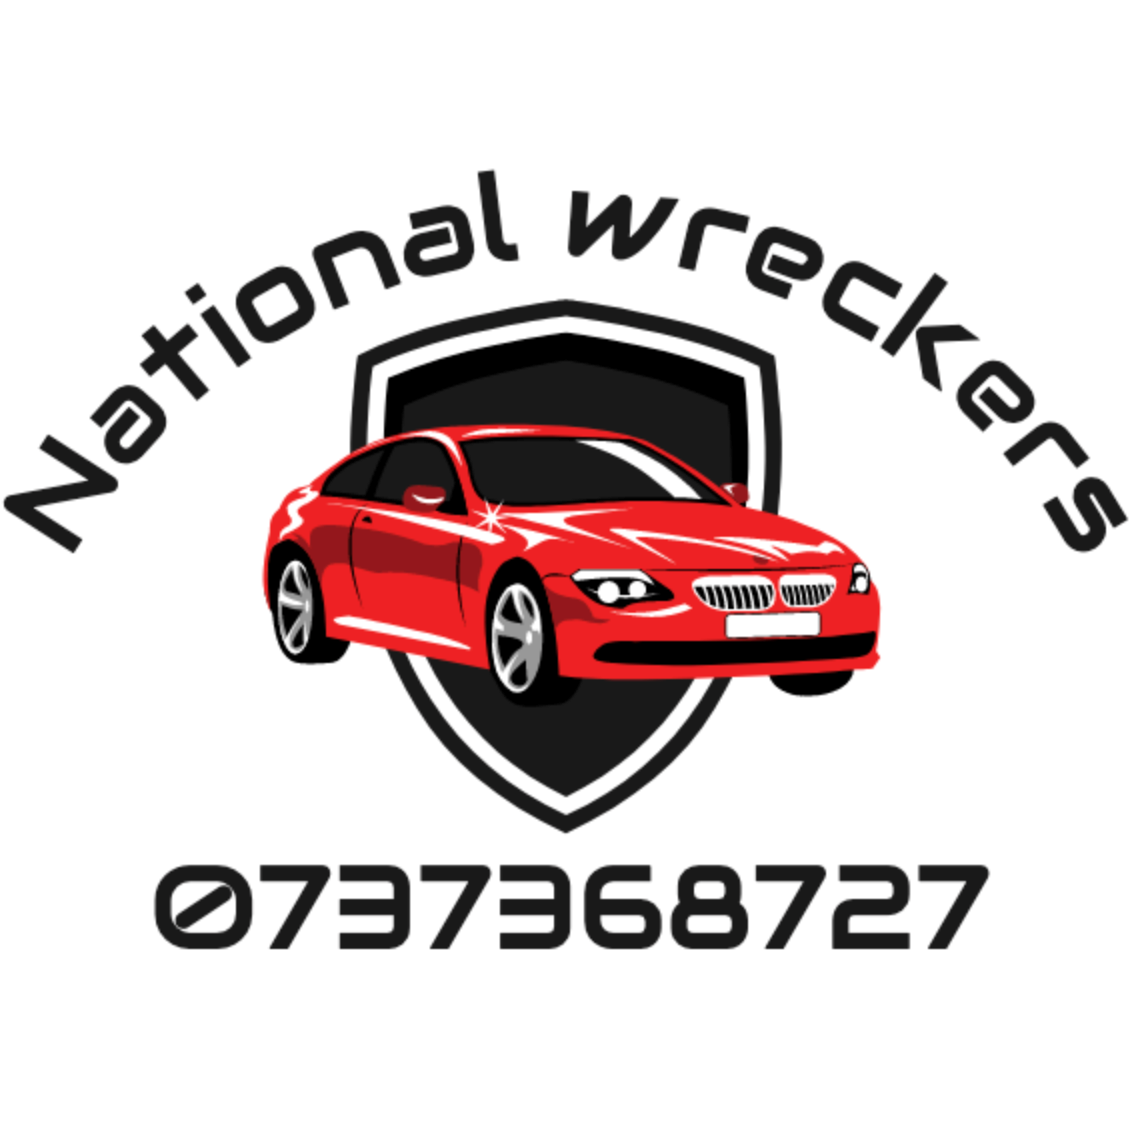 National wreckers - Willawong, QLD 4110 - 0452 594 800 | ShowMeLocal.com